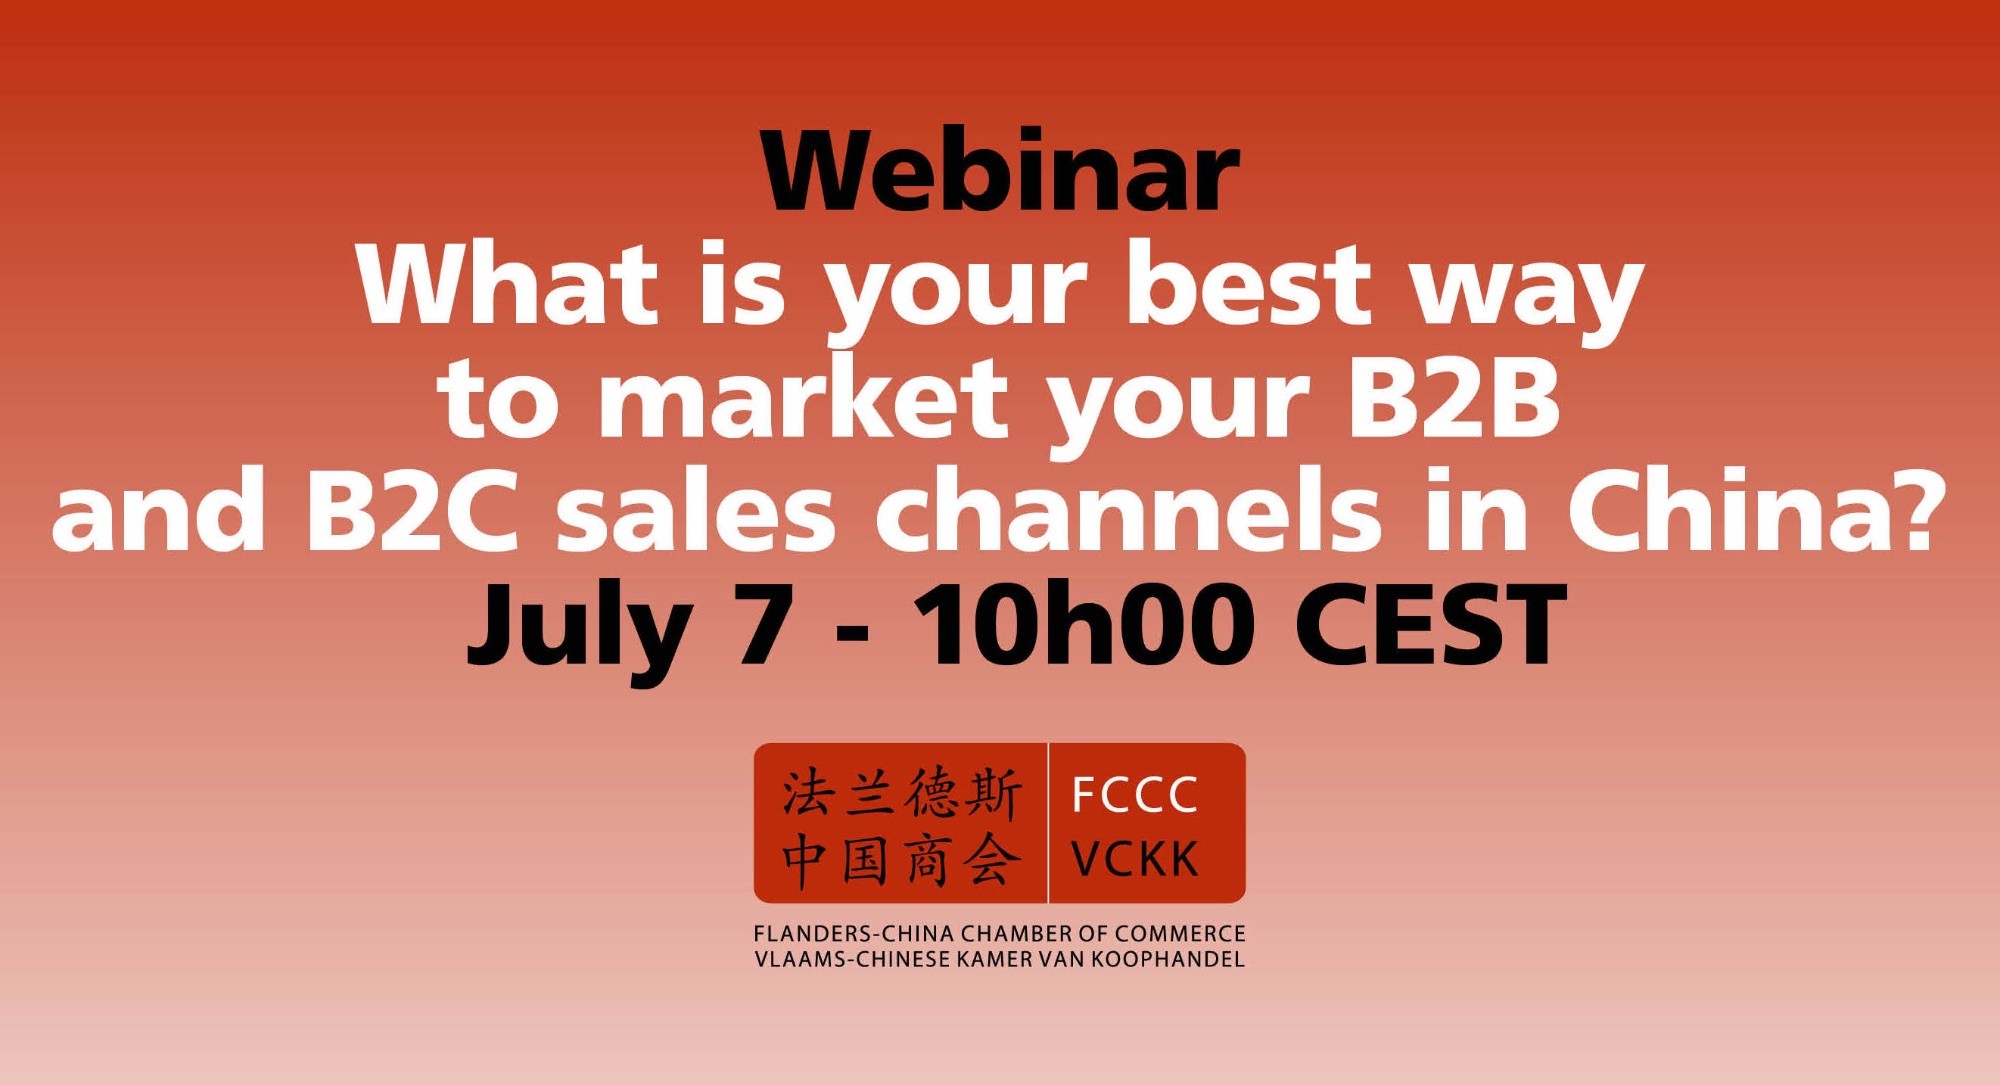 Webinar: What is your best way to market your B2B and B2C sales channels in China? – July 7, 10h00 CEST